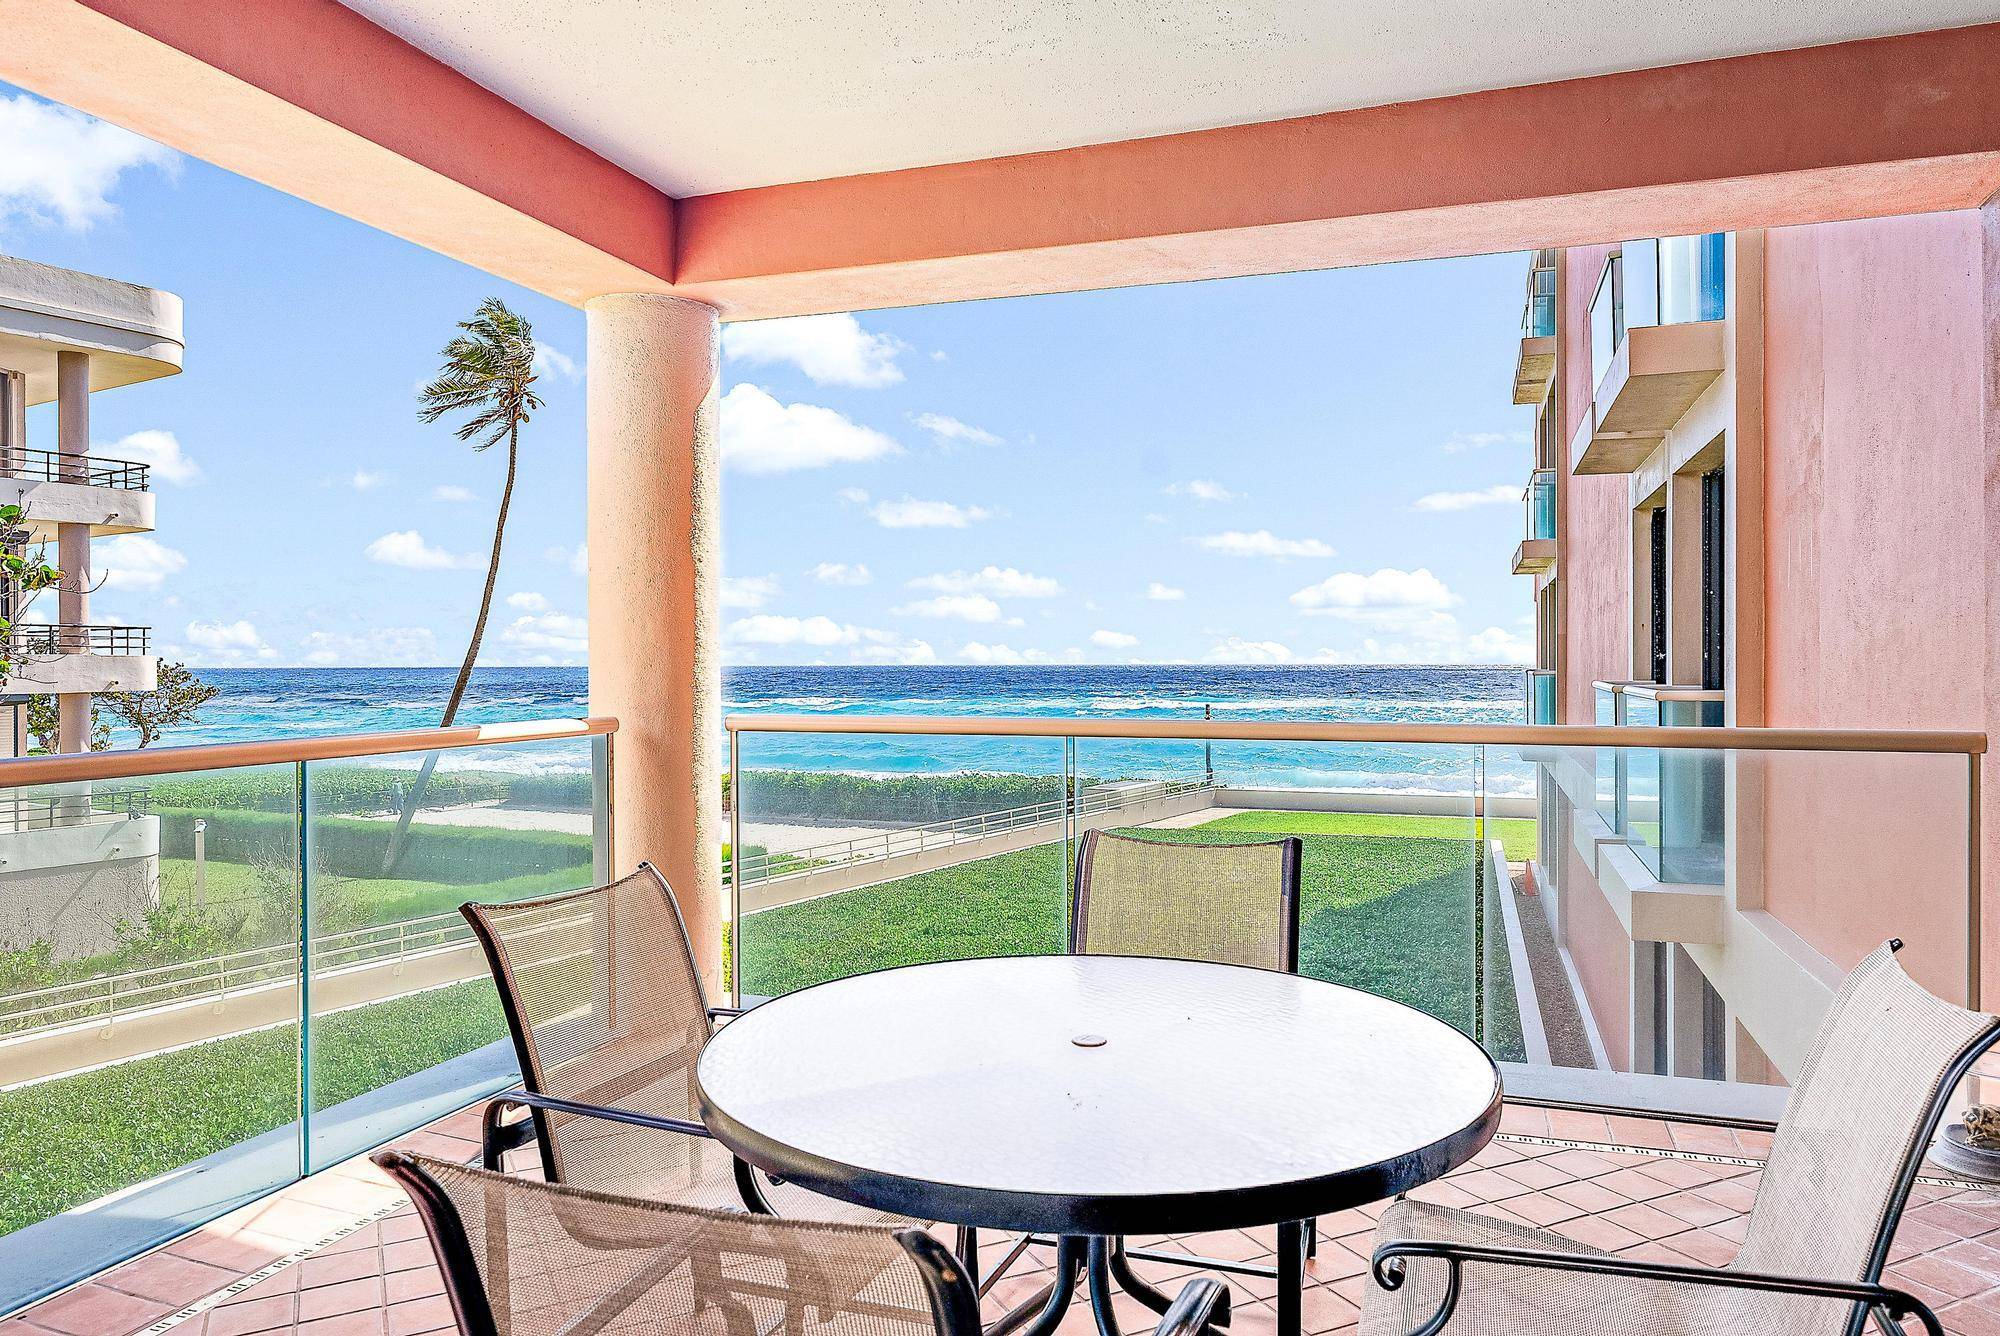 Completely furnished apartment with awesome seaside and golf course views is ready for your immediate enjoyment.